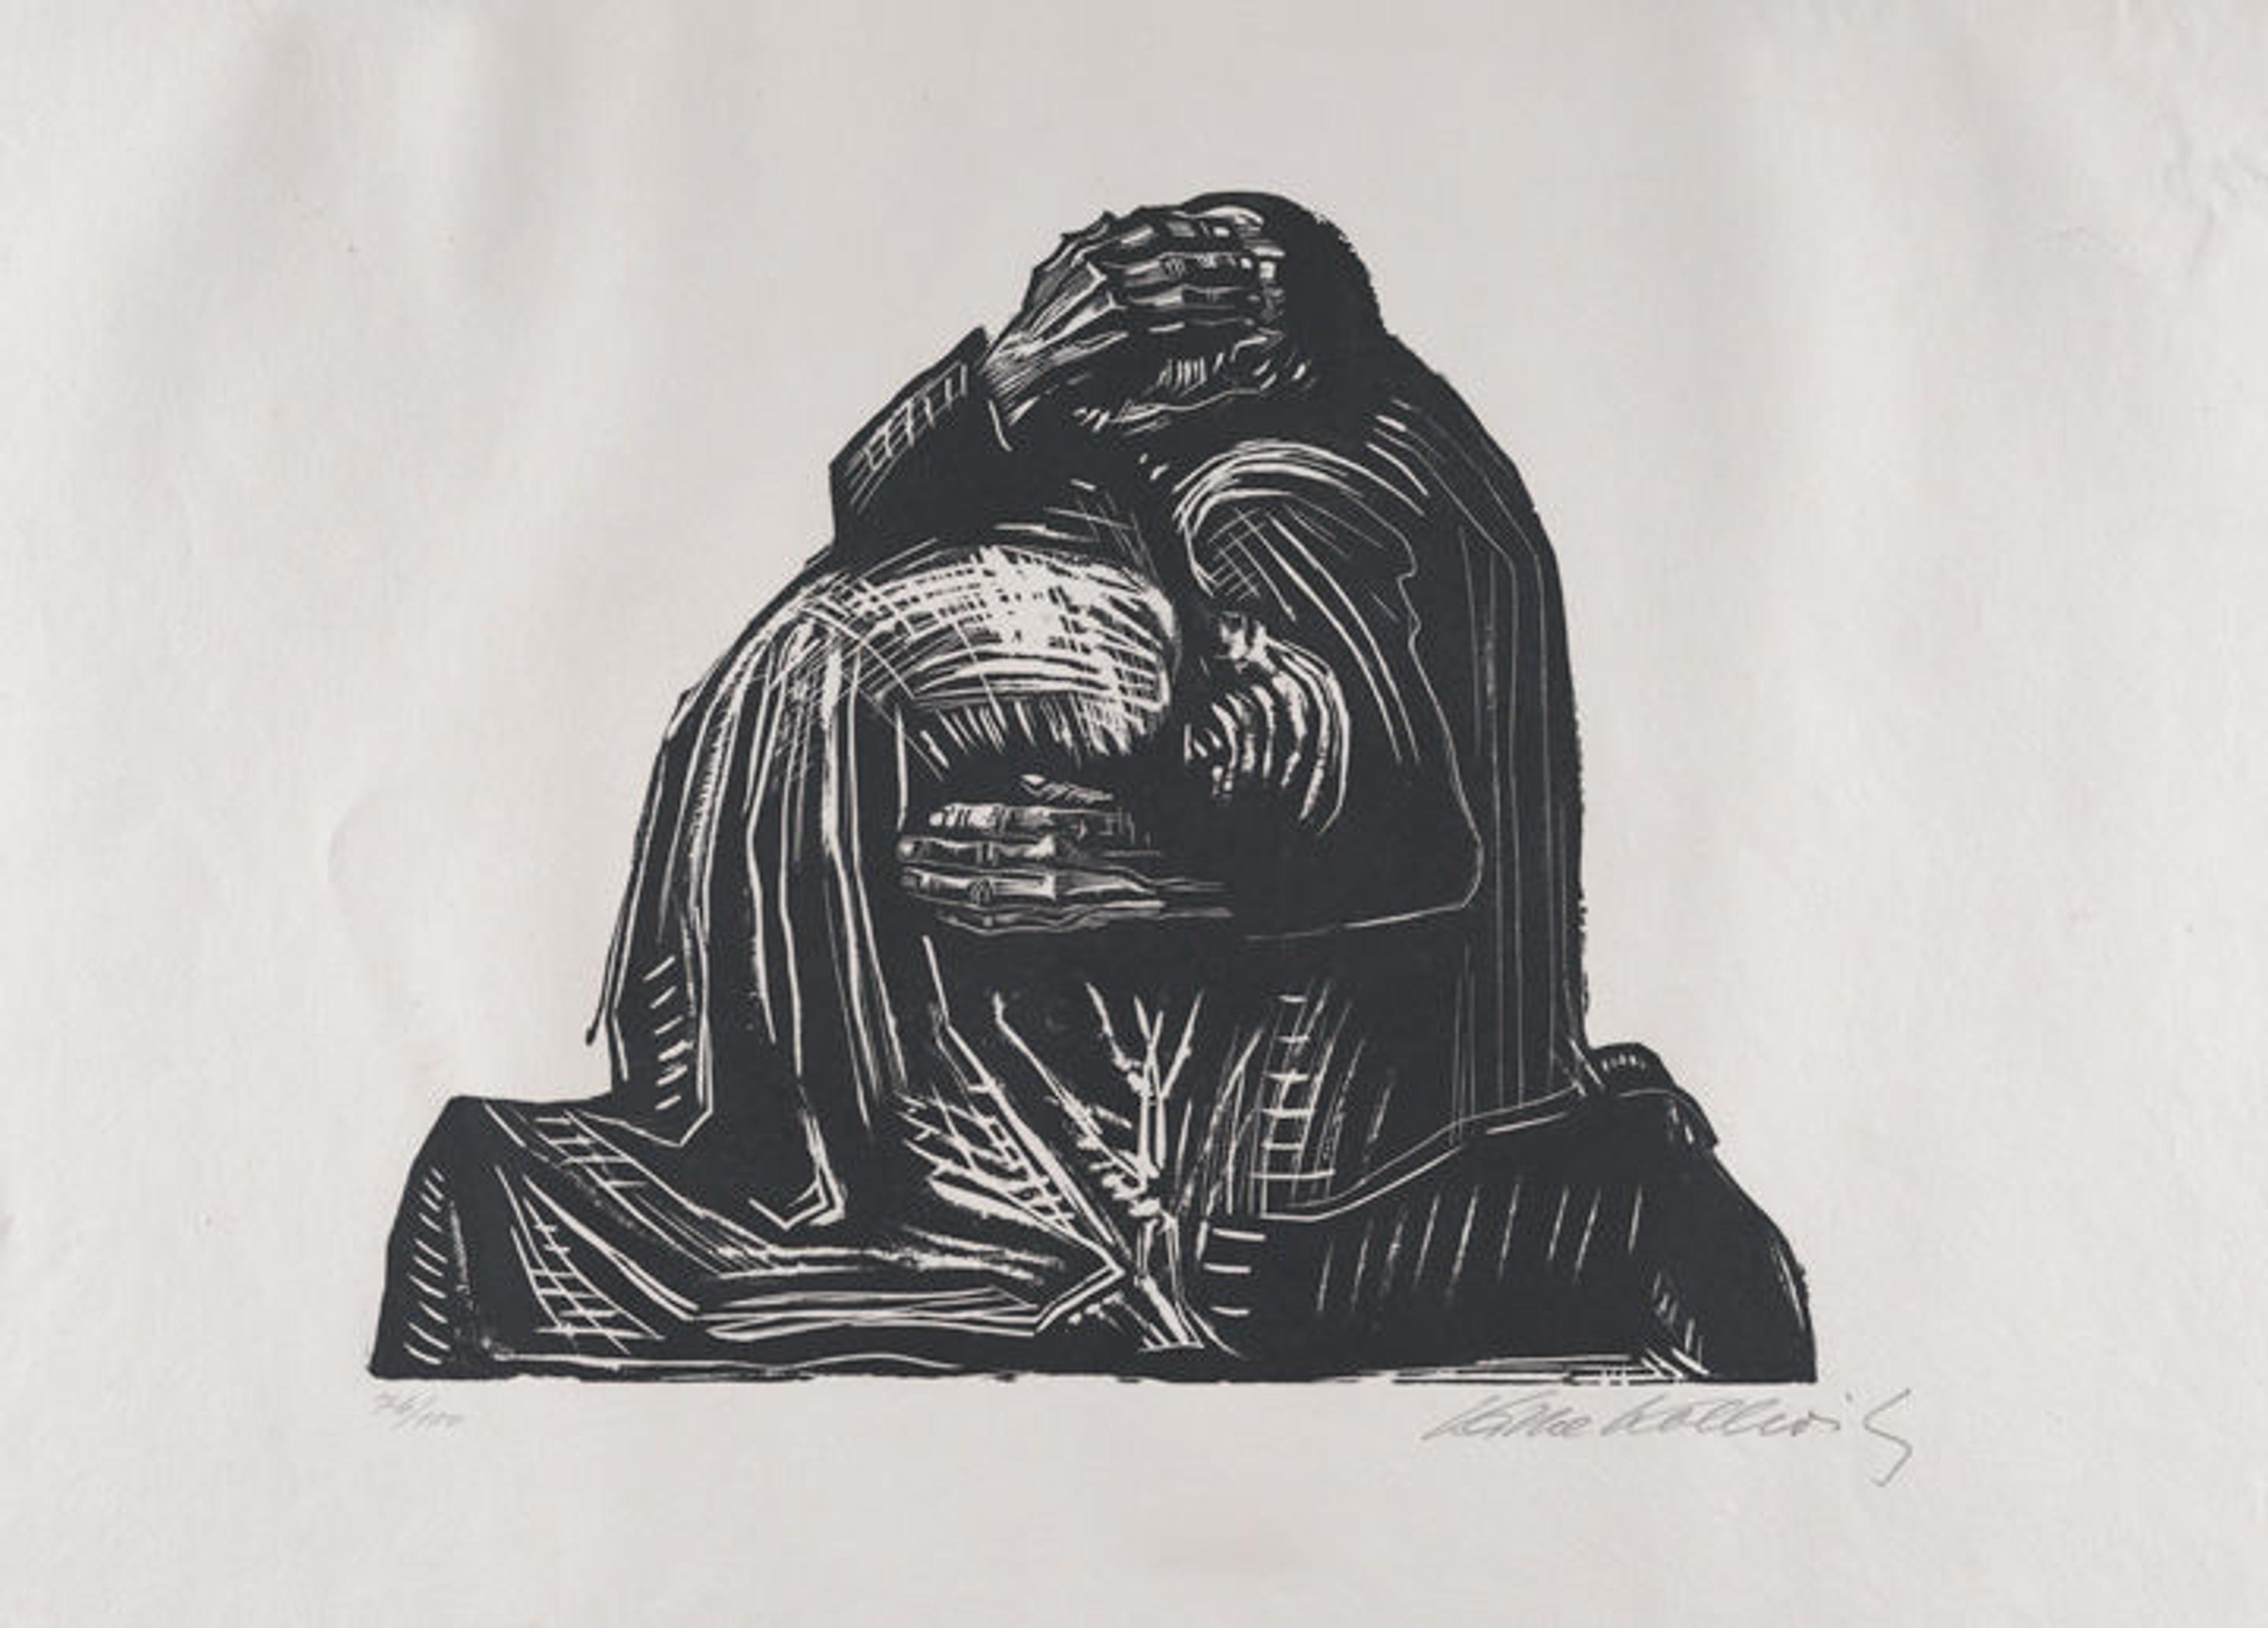 Käthe Kollwitz's 'The Parents (Die Eltern)' showing two parents huddled together in grief